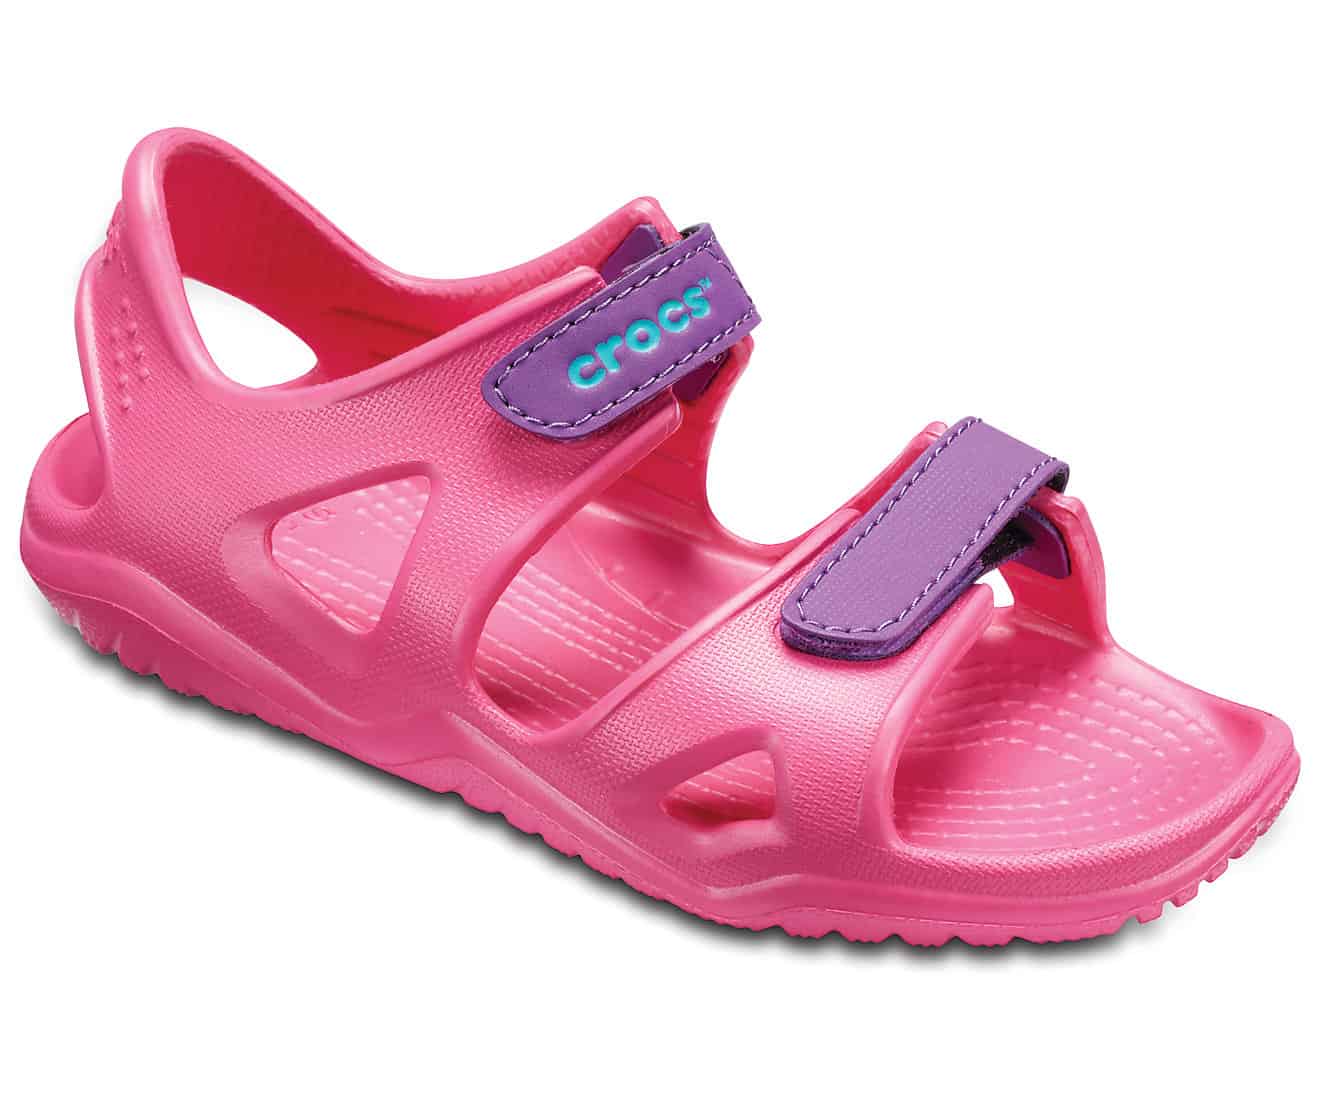 Kids' Swiftwater River Sandals Paradise Pink / Amethyst